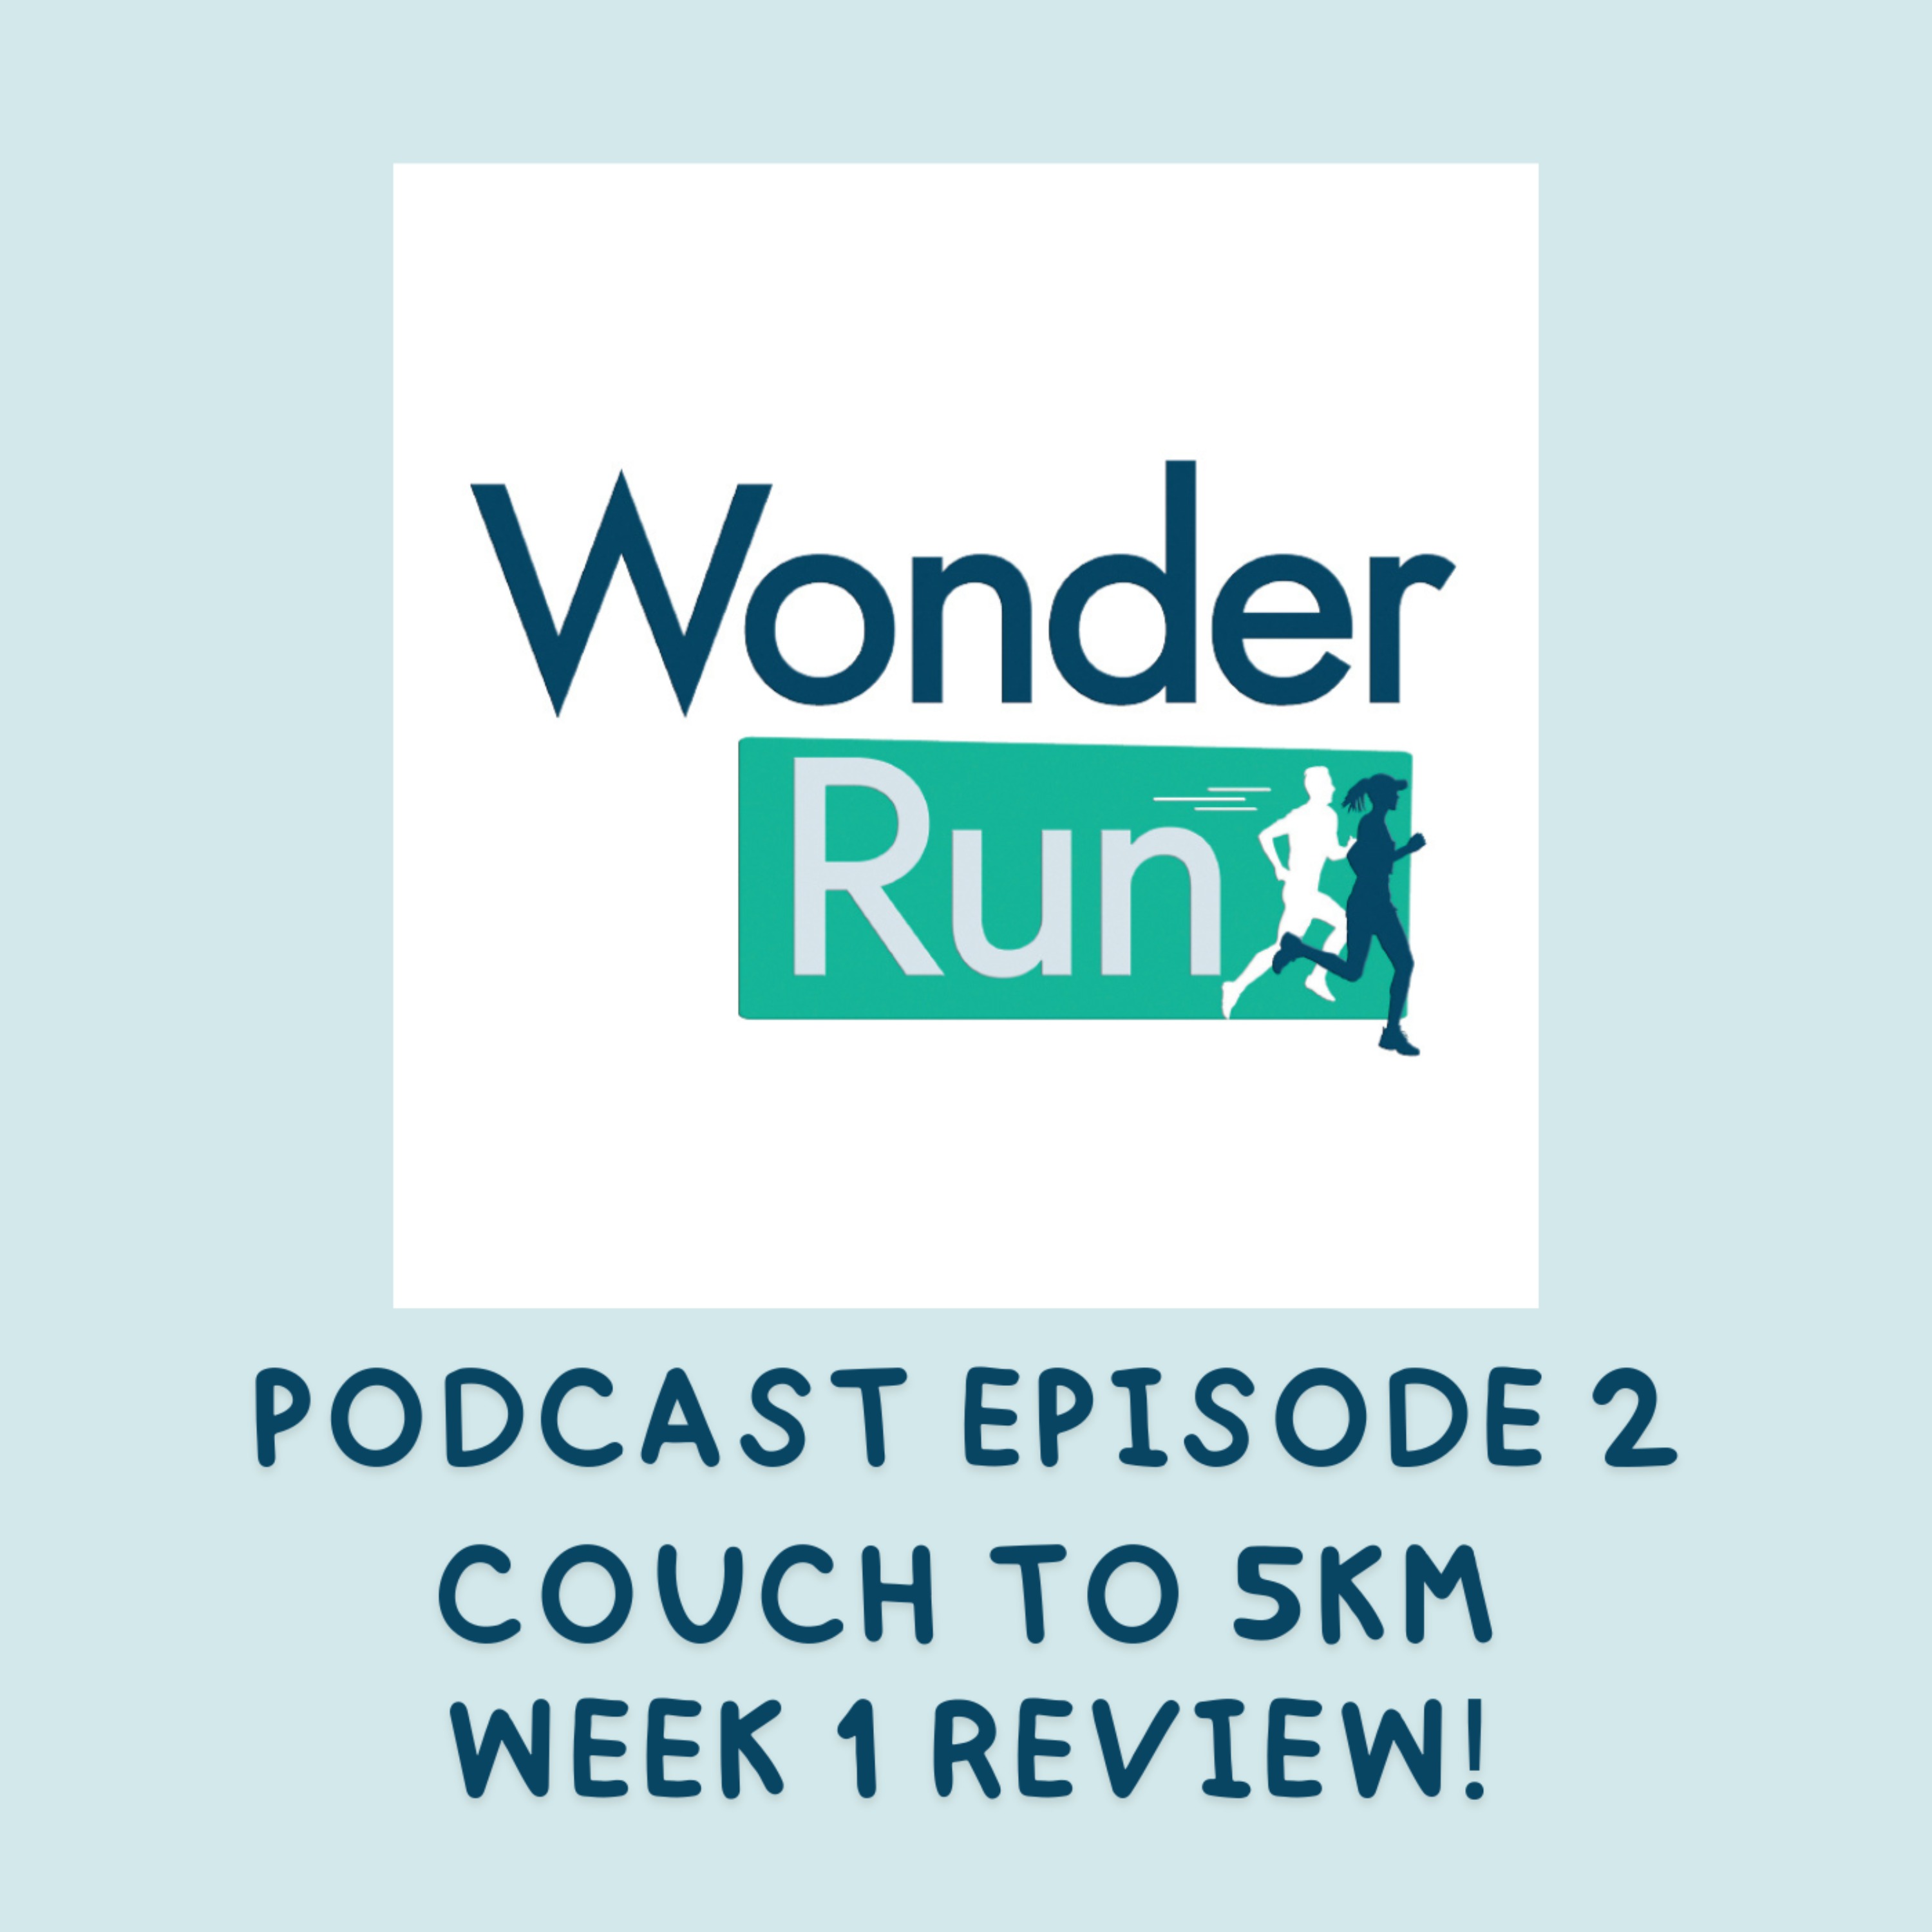 Couch to 5km - Week 1 Review!